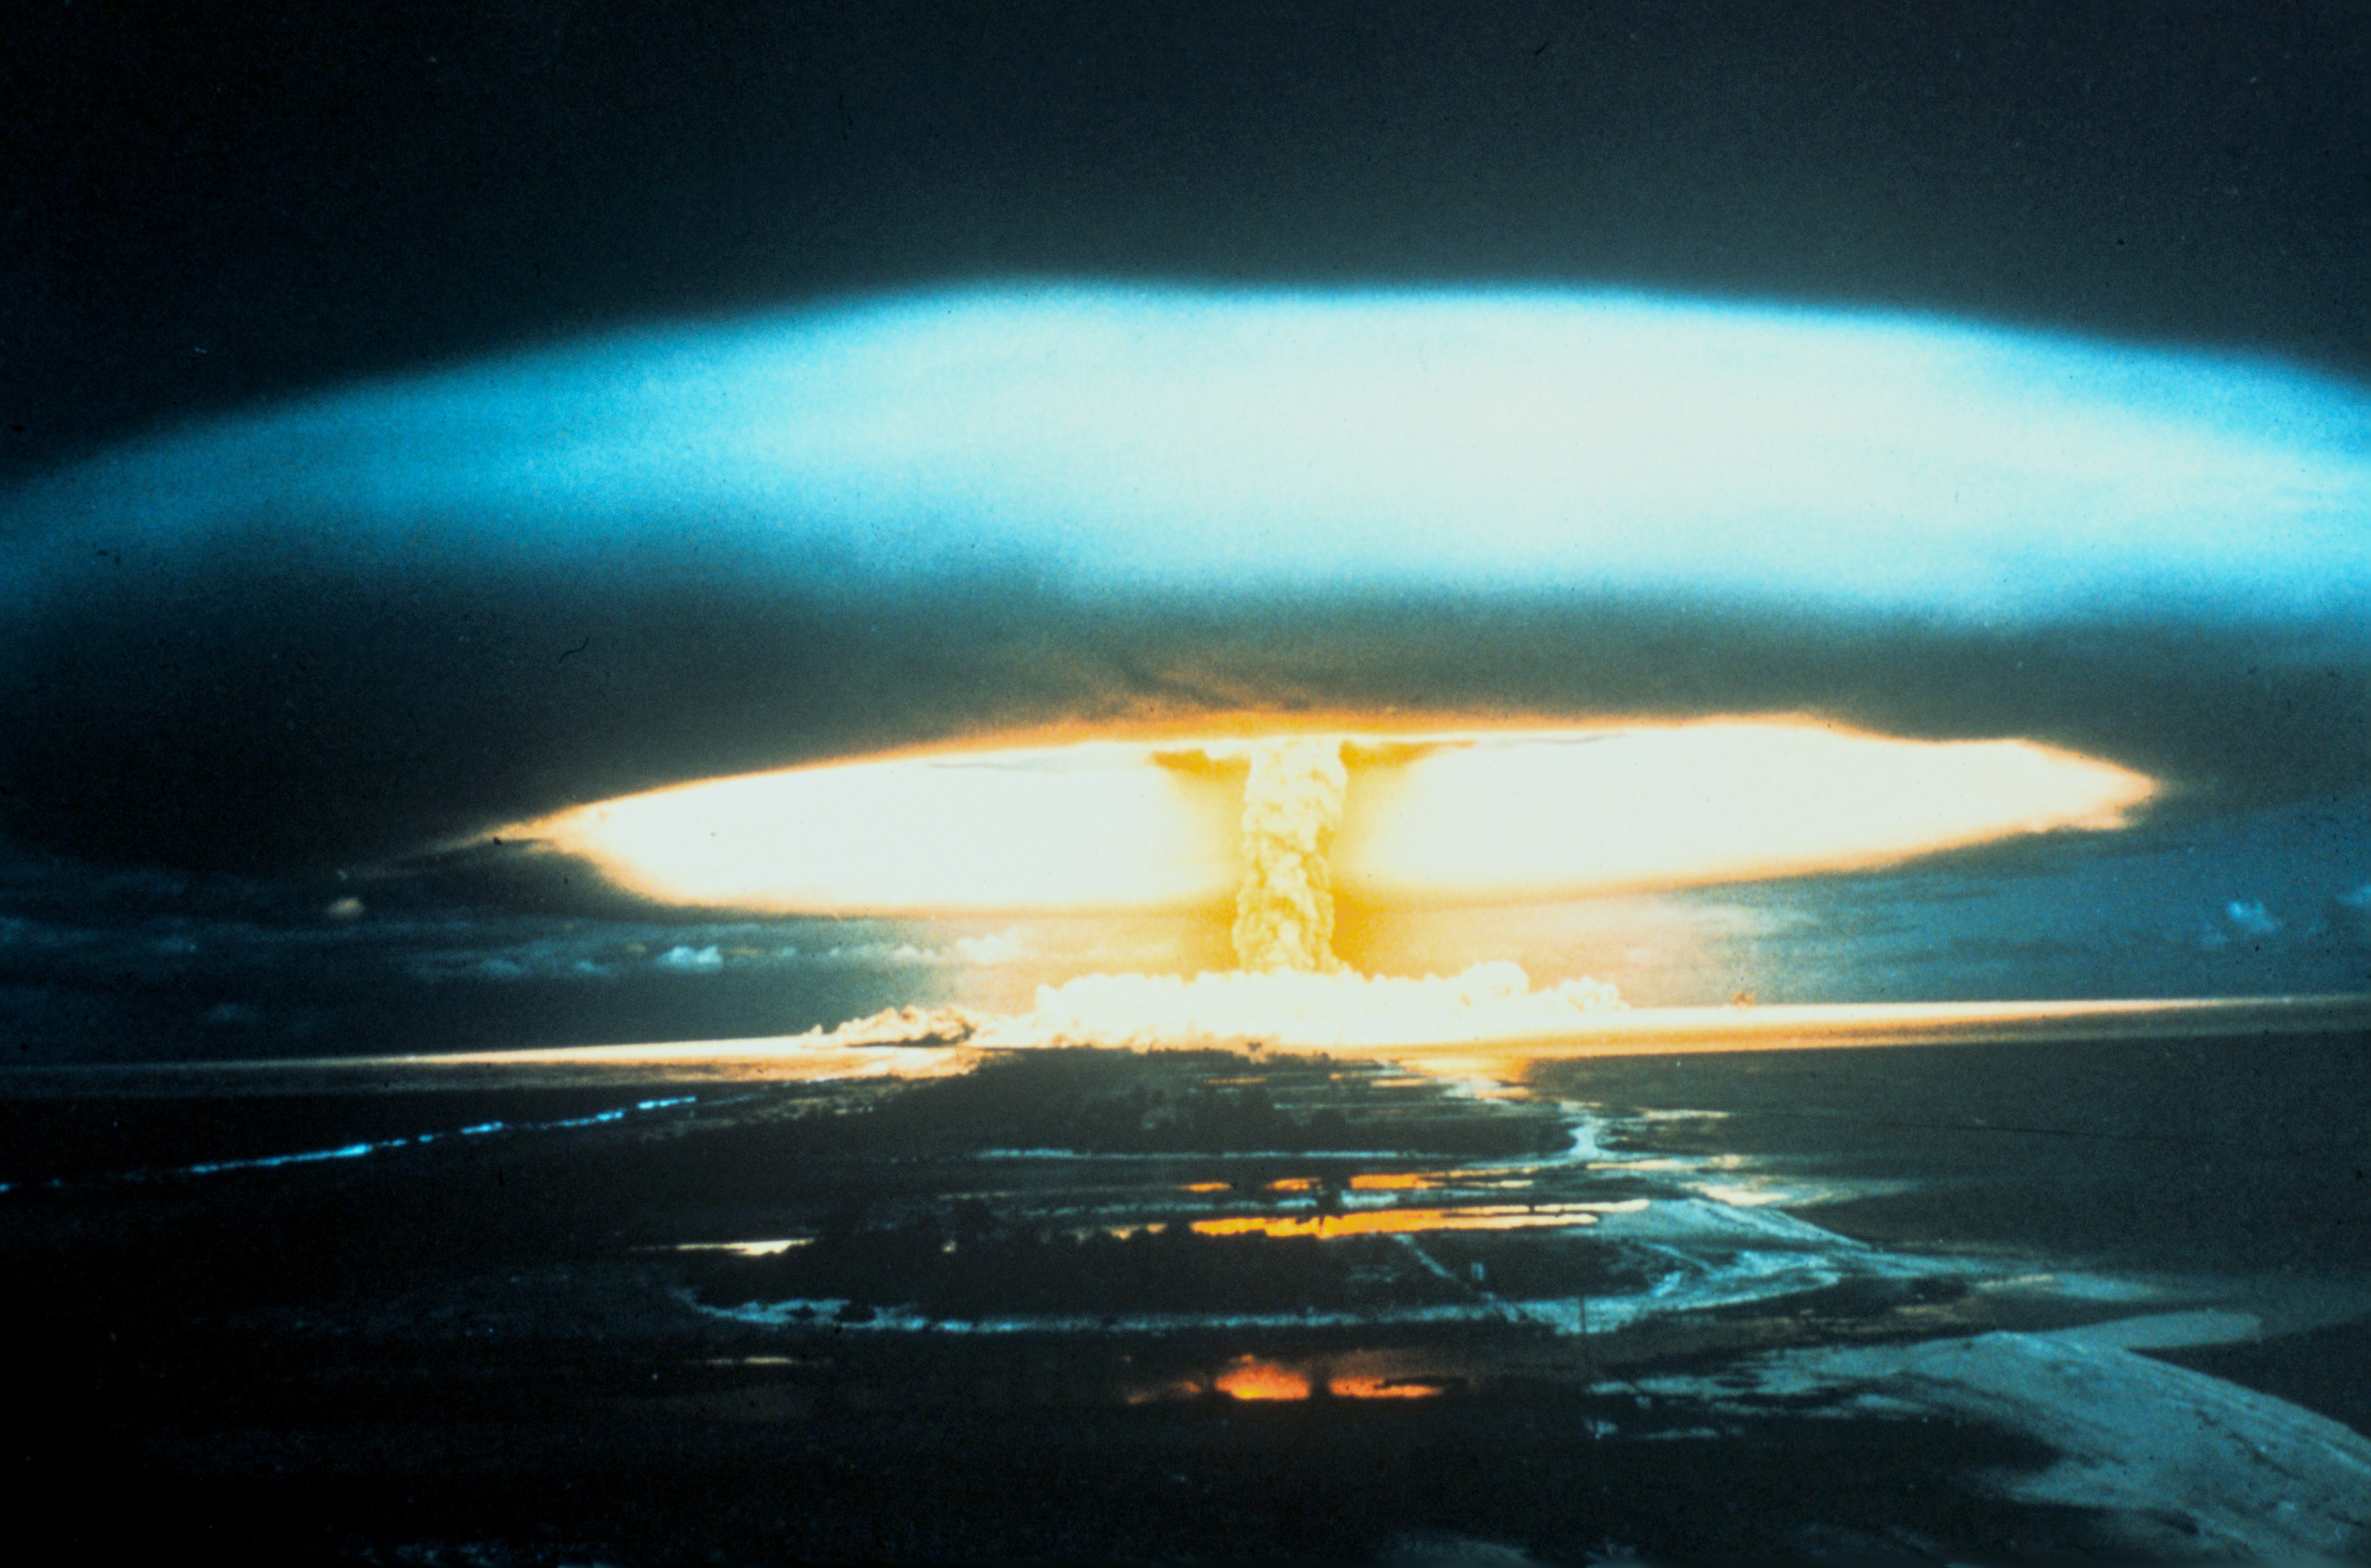 The US detonated their most powerful thermonuclear bomb at Bikini Atoll